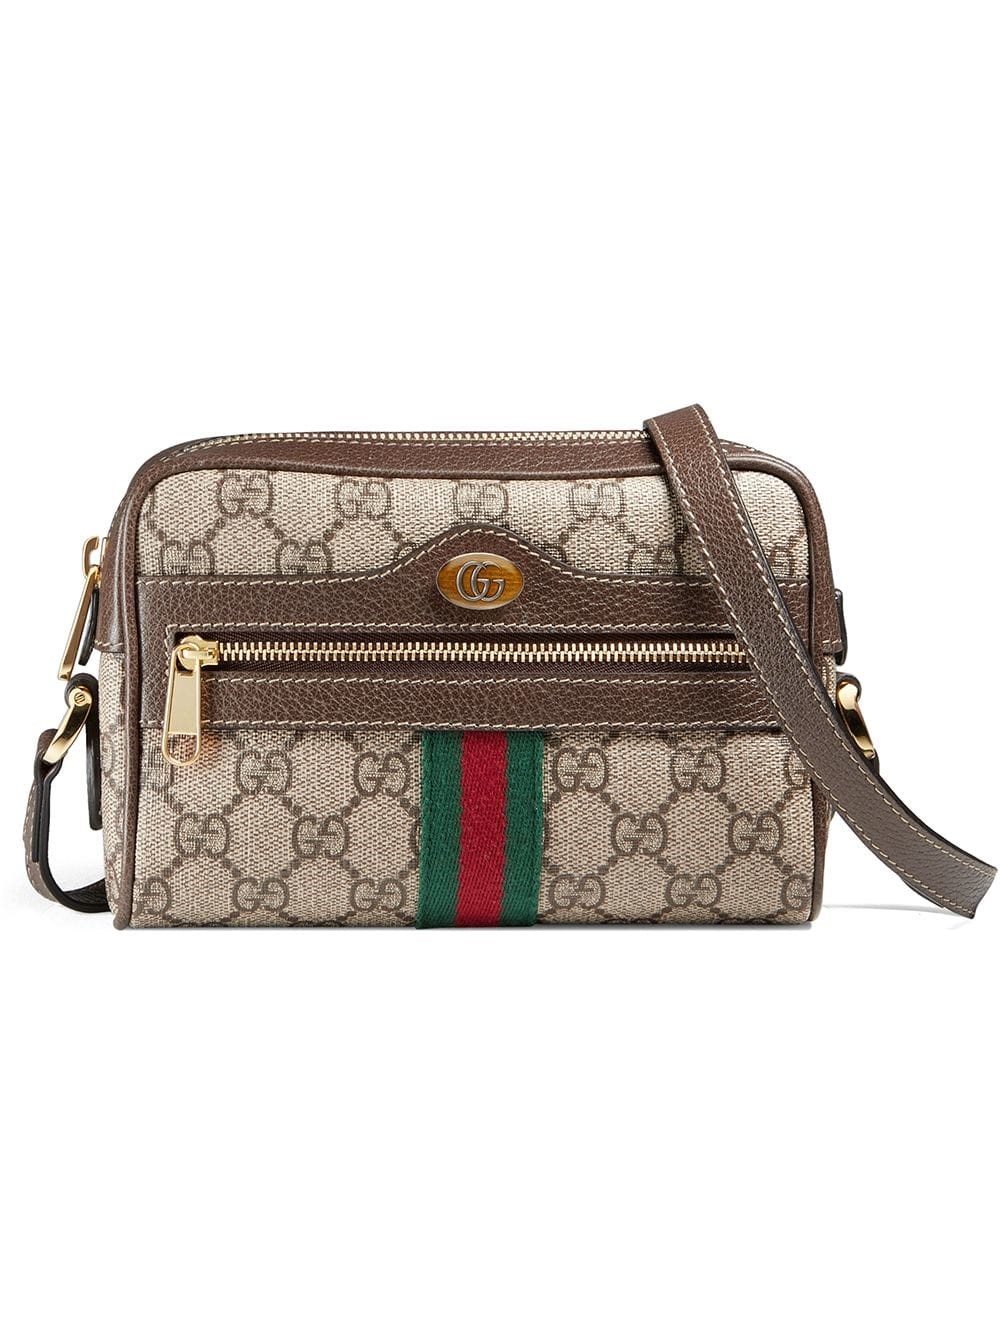 gucci OPHIDIA CROSS BODY BAG available on www.neverfullbag.com - 27690